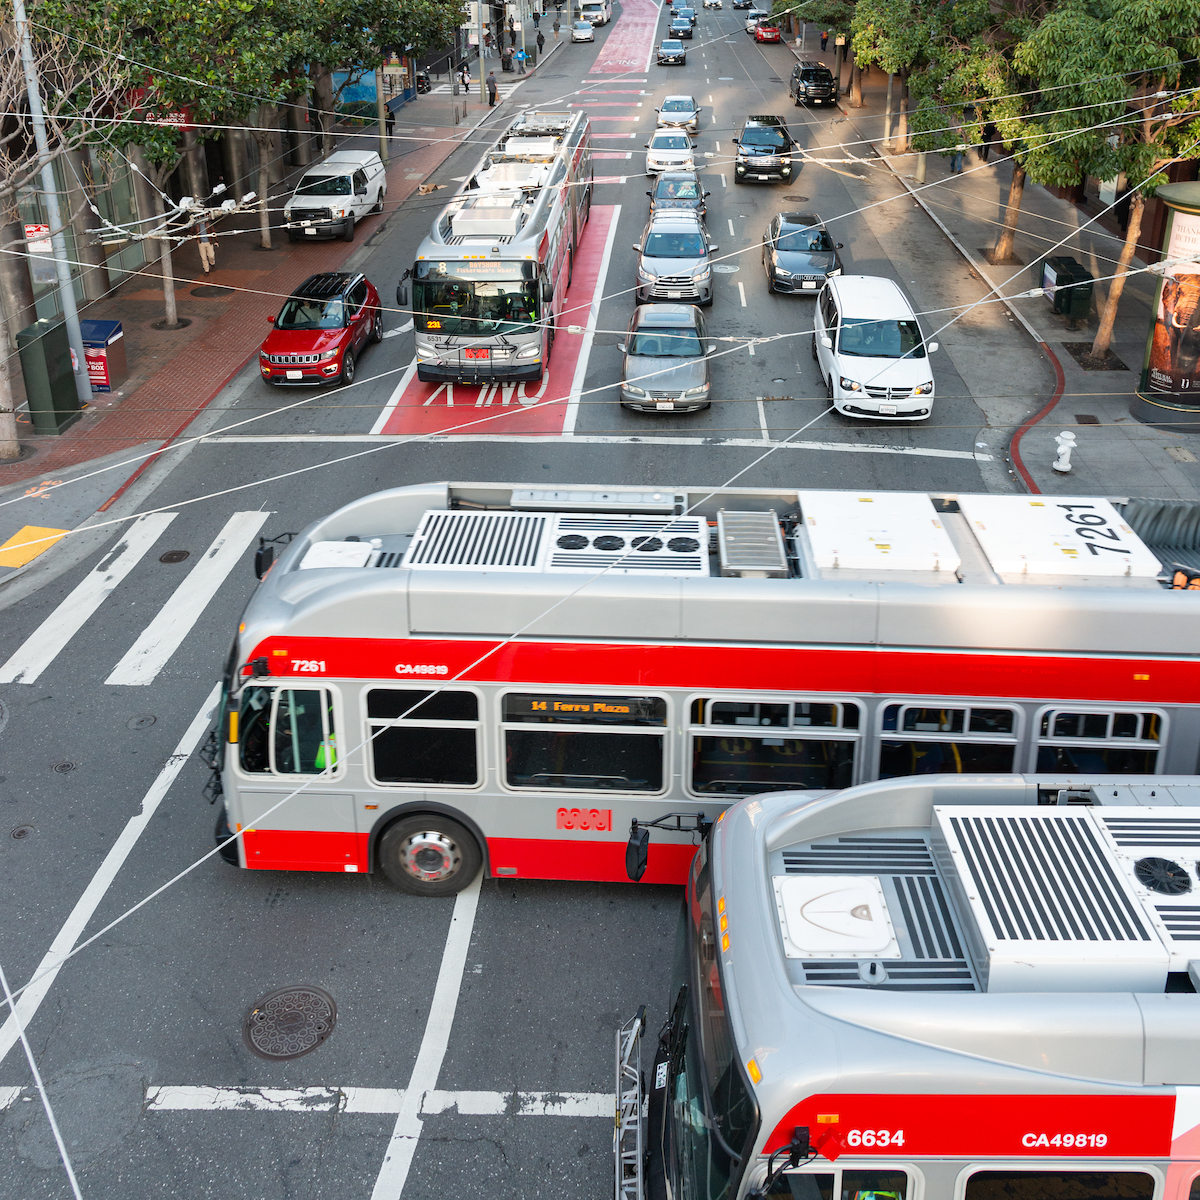 Buses and cars at an intersection with overhead wires